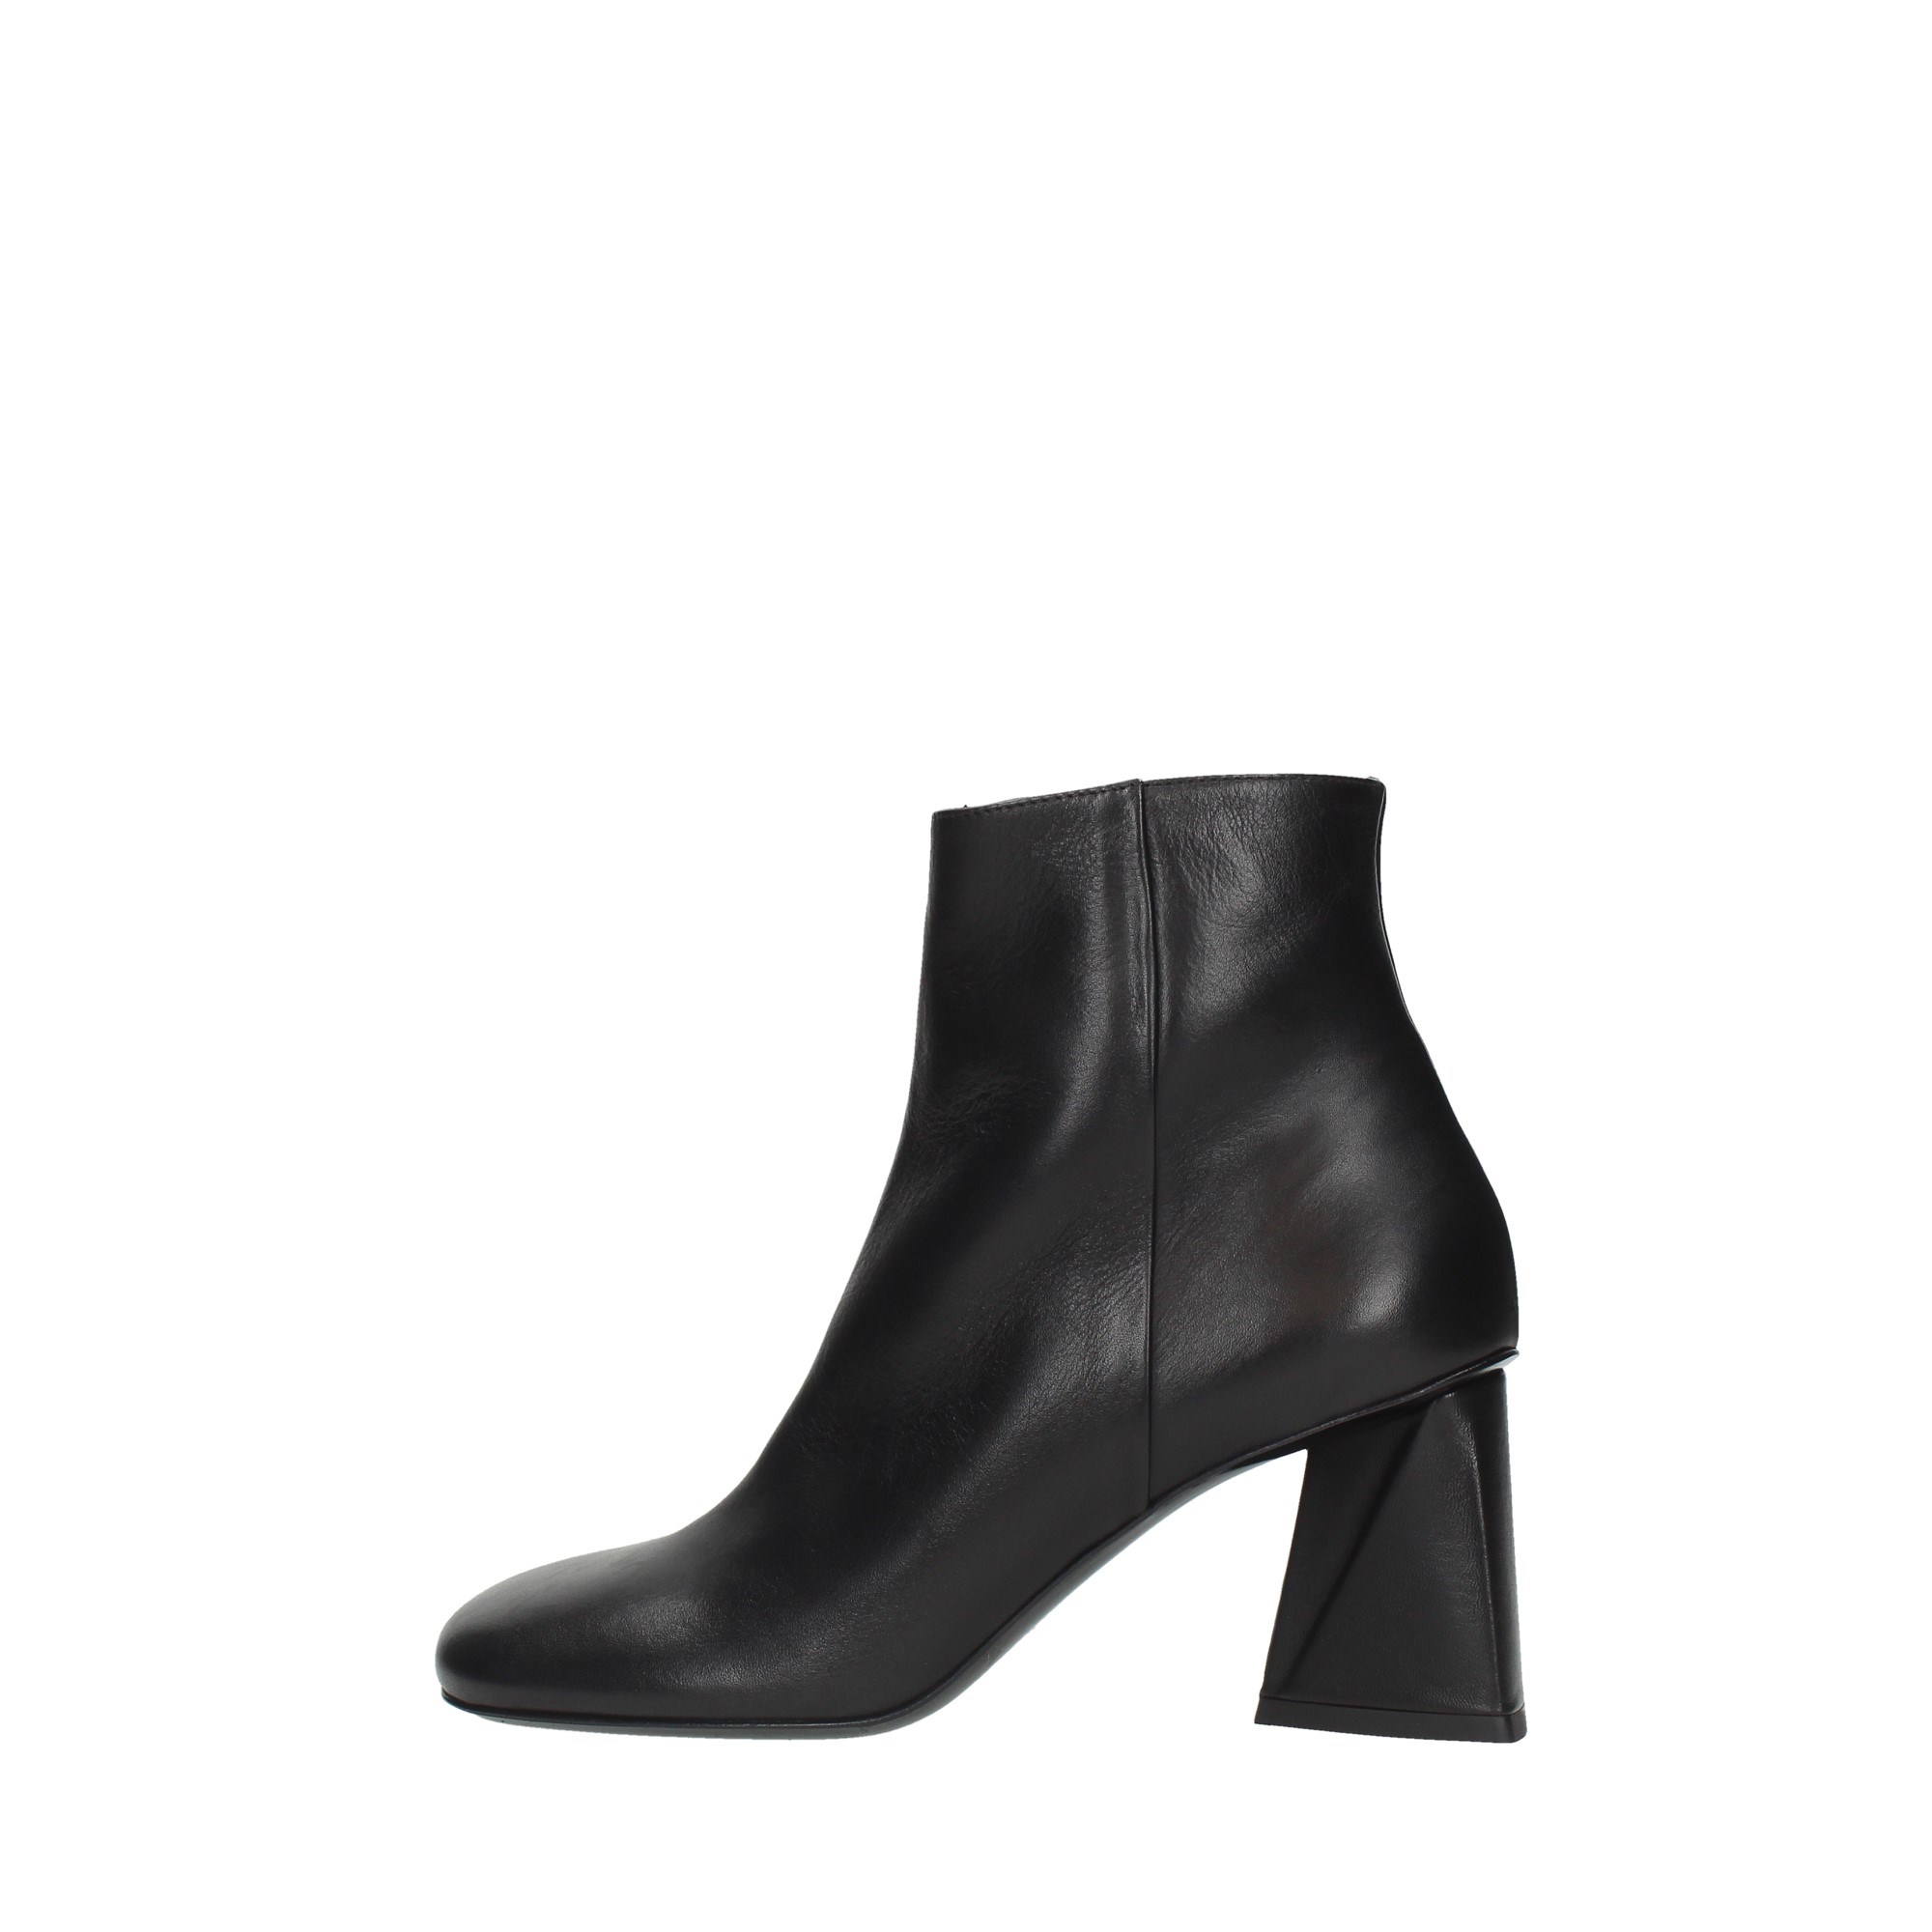 Strategia Shoes Women Booties A5263